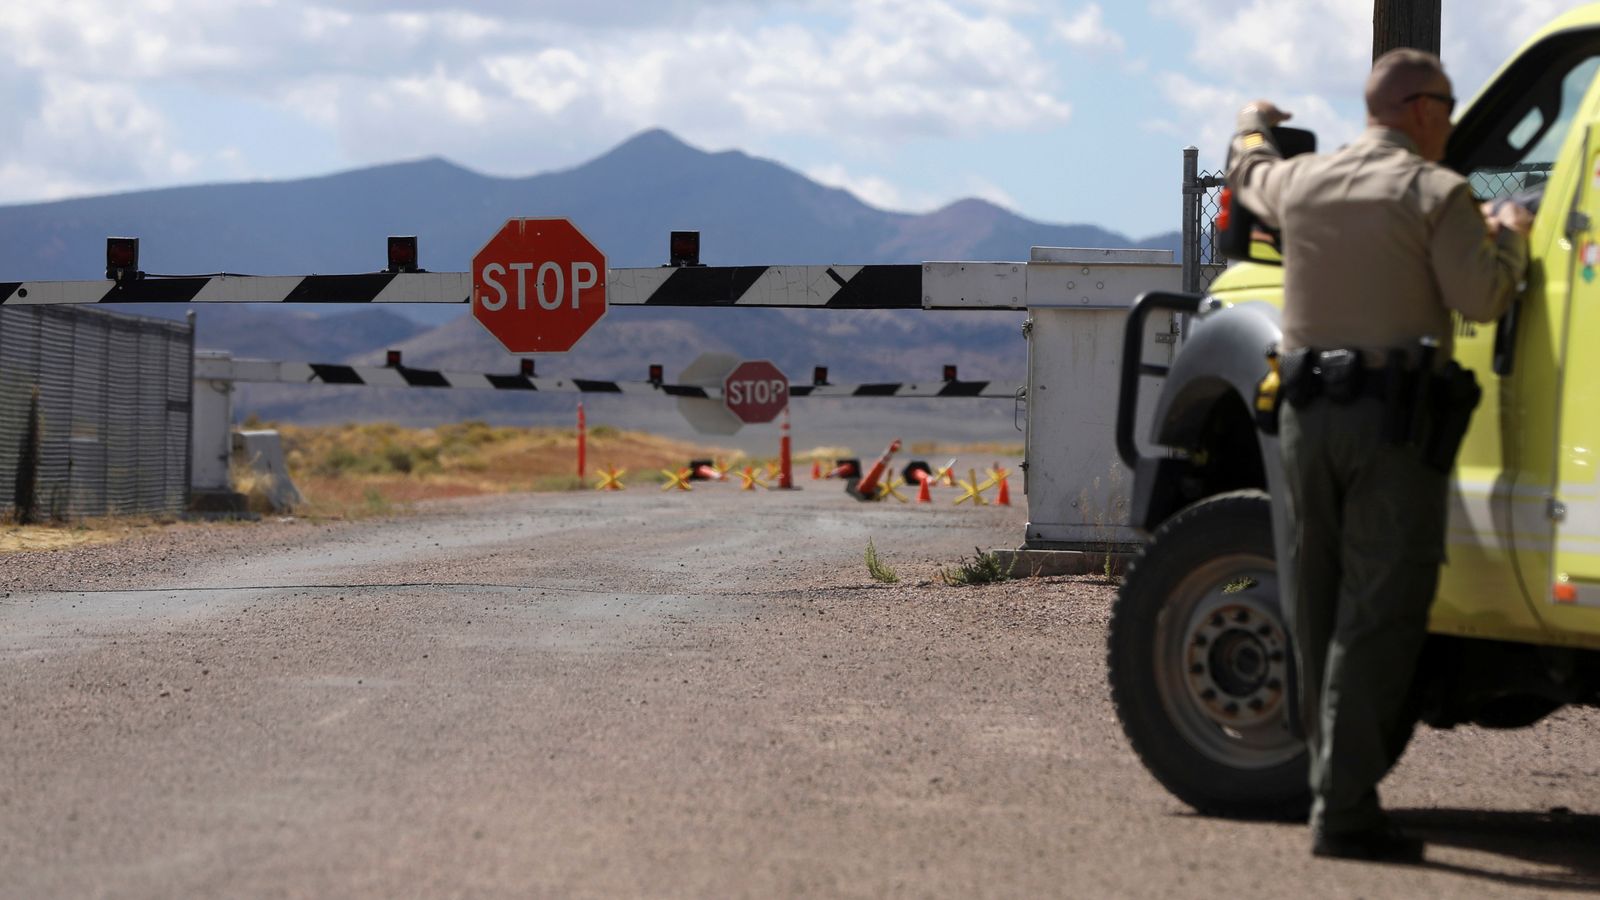 Area 51 blogger Joerg Arnu accuses authorities of sending 'a message to silence' as his homes are raided by FBI and air force agents